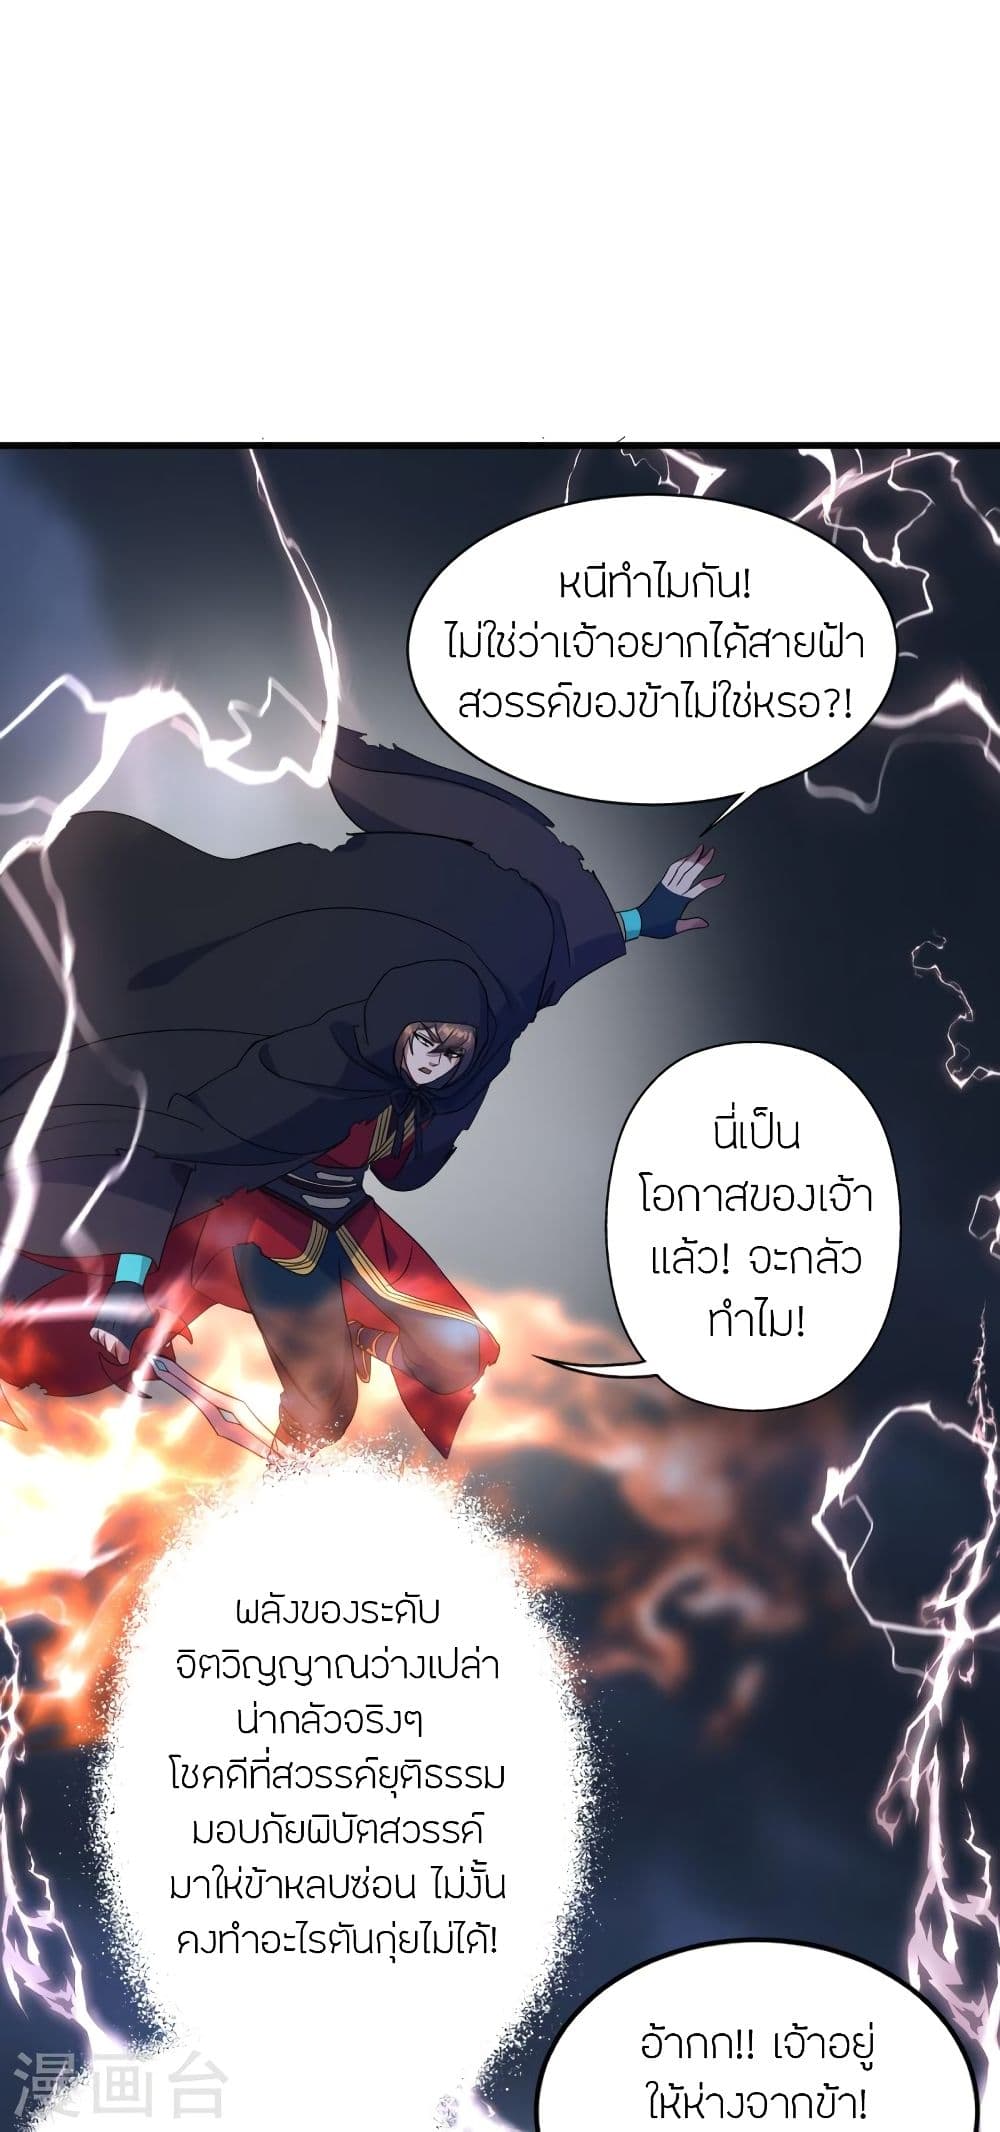 Banished Disciple's Counterattack เธเธฑเธเธฃเธเธฃเธฃเธ”เธดเน€เธเธตเธขเธเธขเธธเธ—เธ 304 (54)